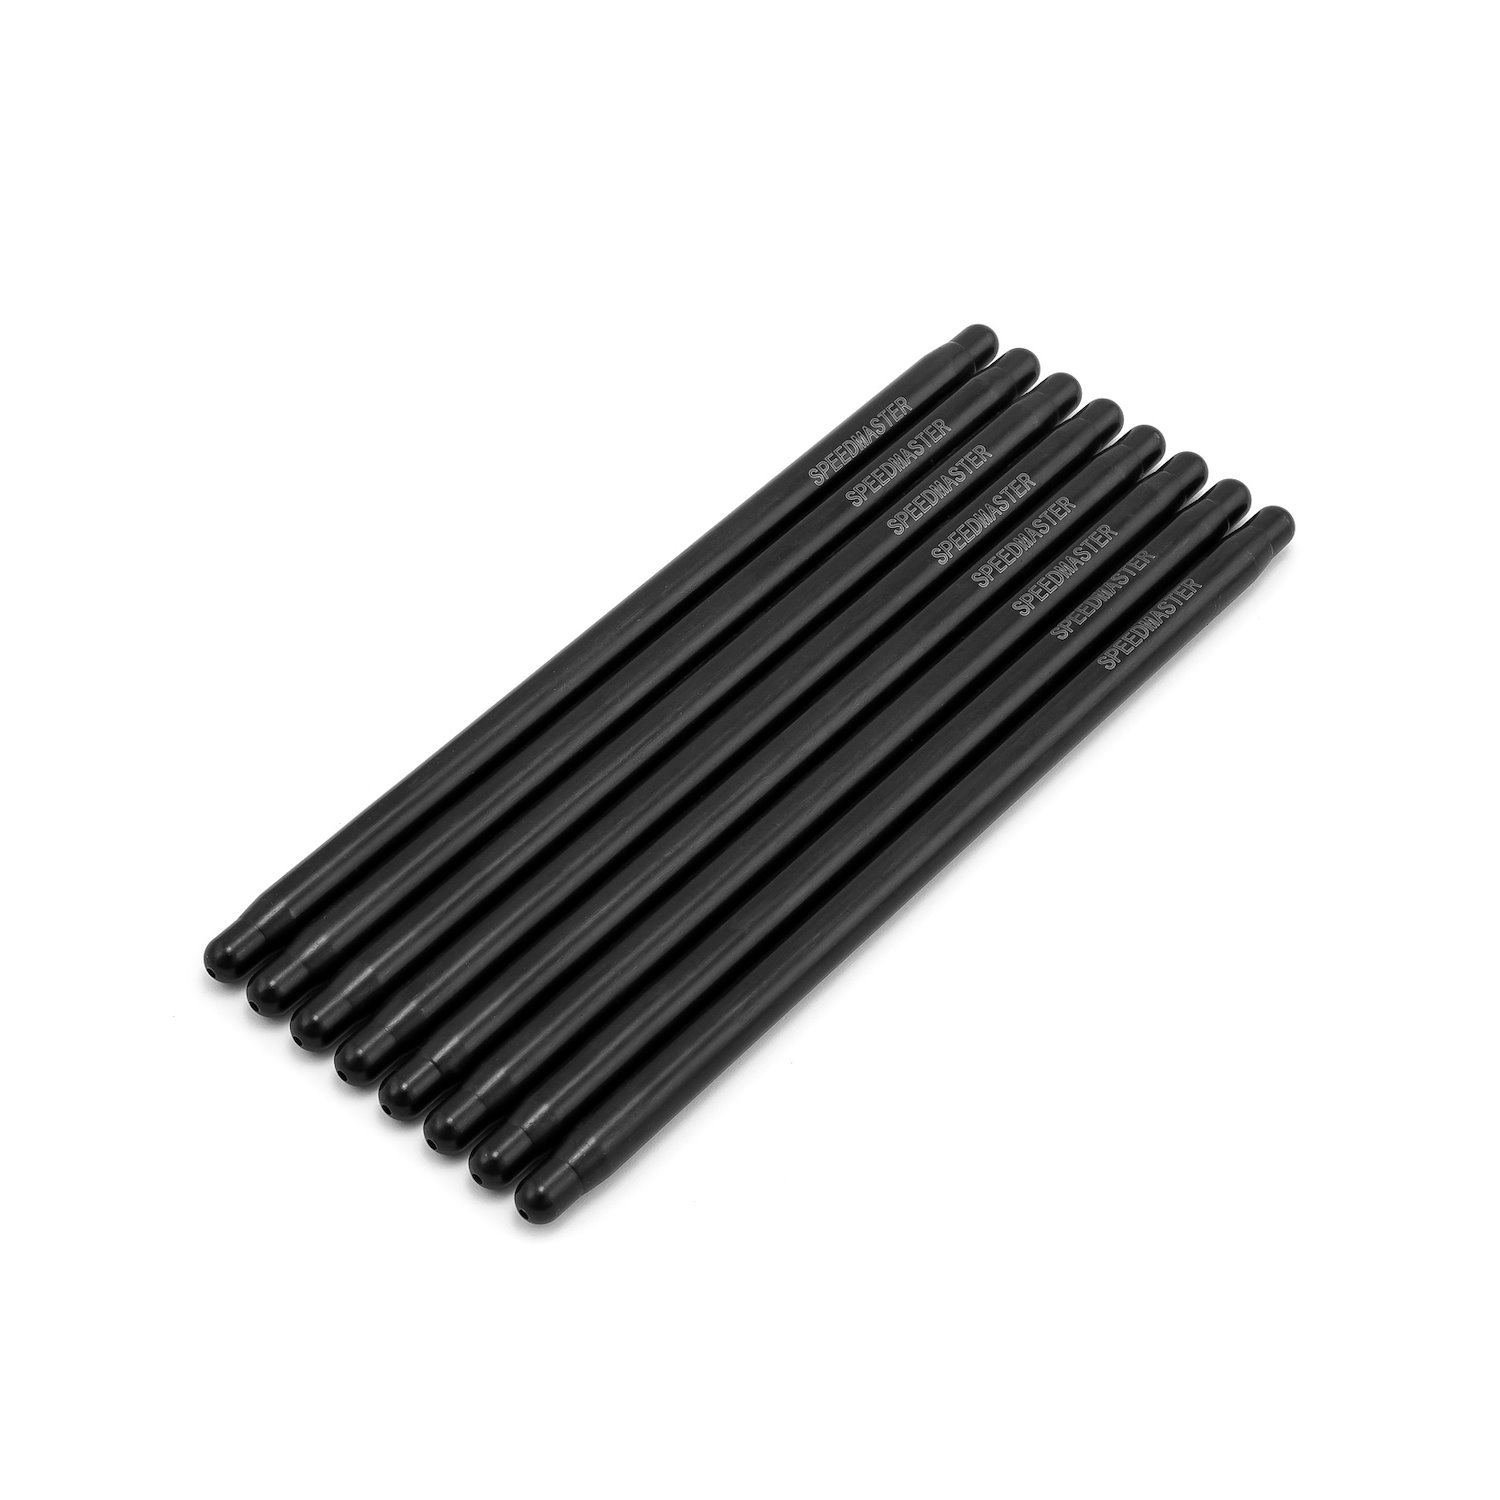 1-254-034 8.700 in. Chromoly Heat-Treated 3/8 in. 0.080 in. Wall DNA One-Piece Pushrods